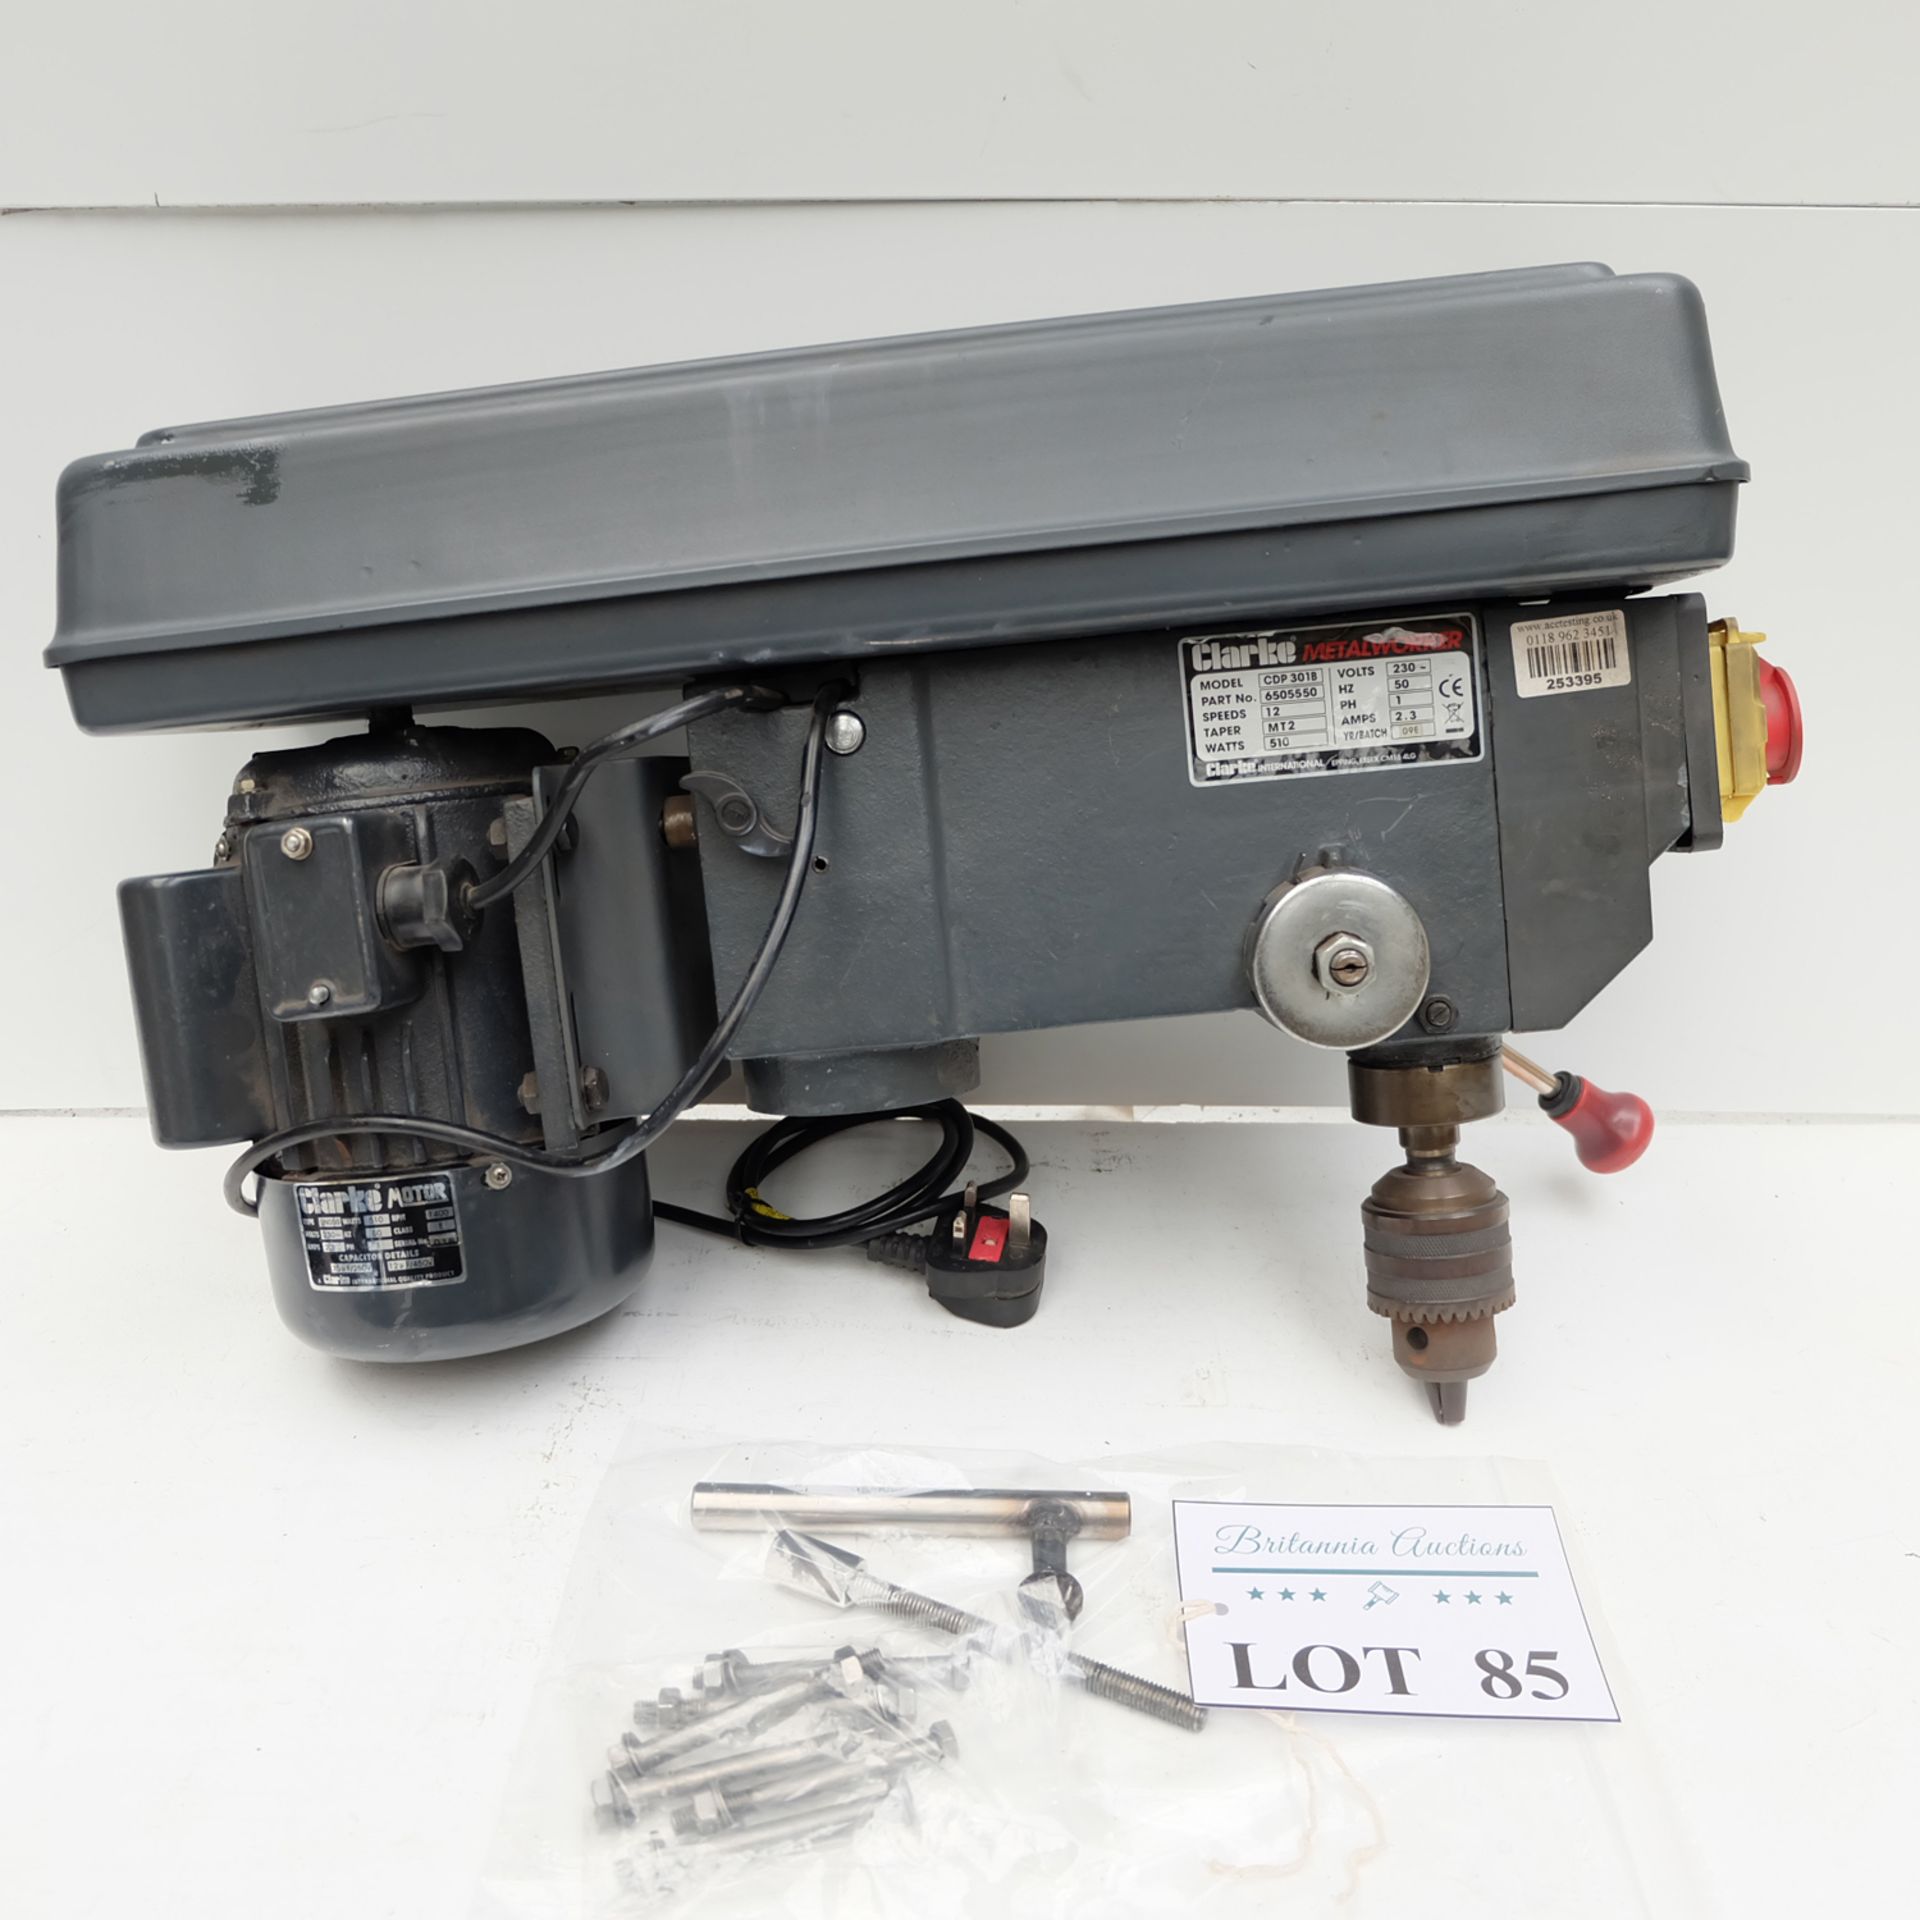 Clarke Metalworker Model CDP 301B Pillar Drill Head for Spares or Repairs. - Image 3 of 6